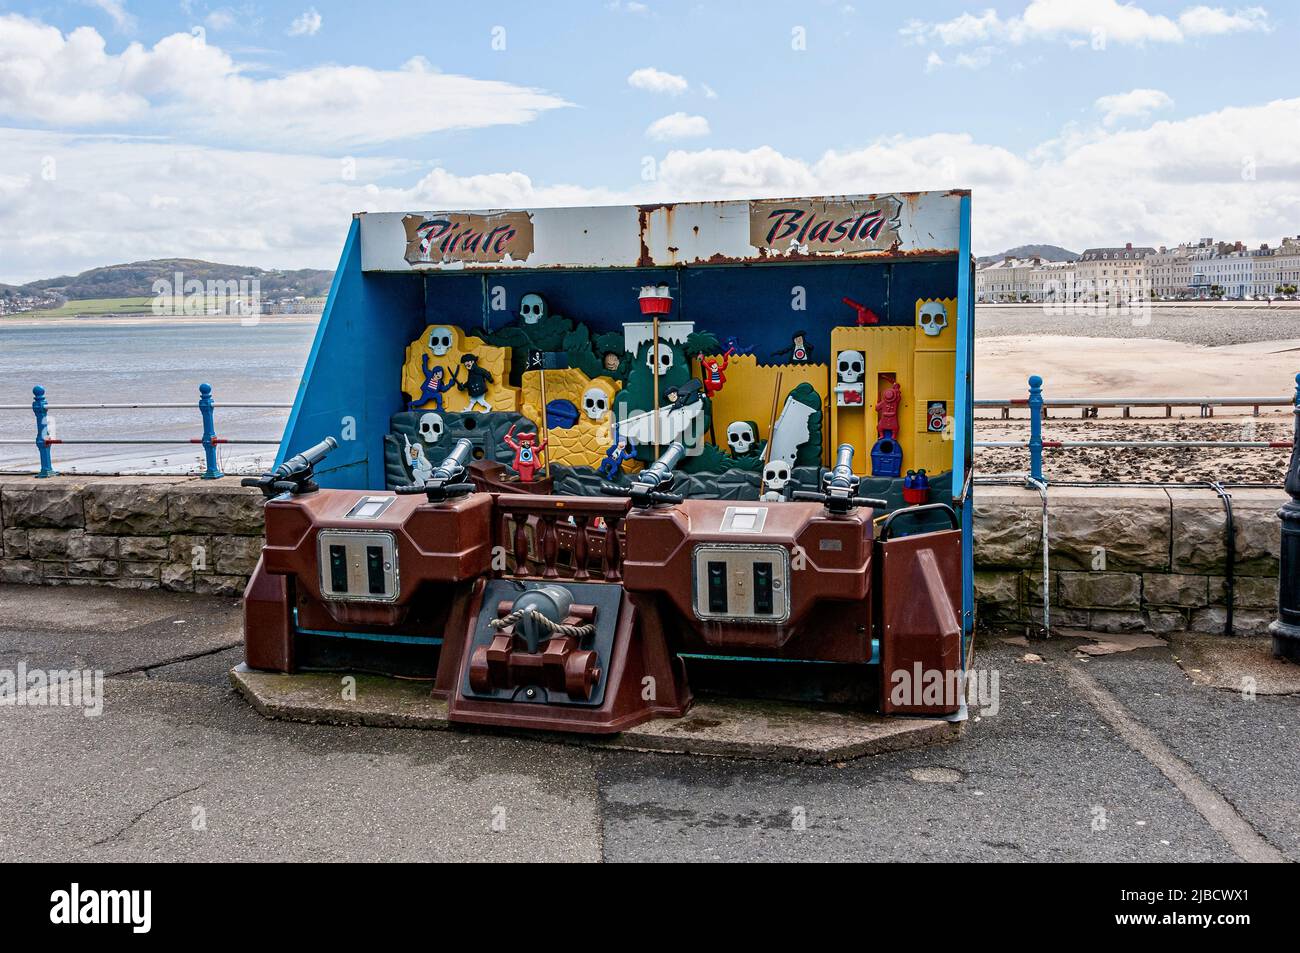 A brown children and adults amusement game blasting jets of water at skulls and other objects just before the entrance to the Victorian Llandudno Pier Stock Photo